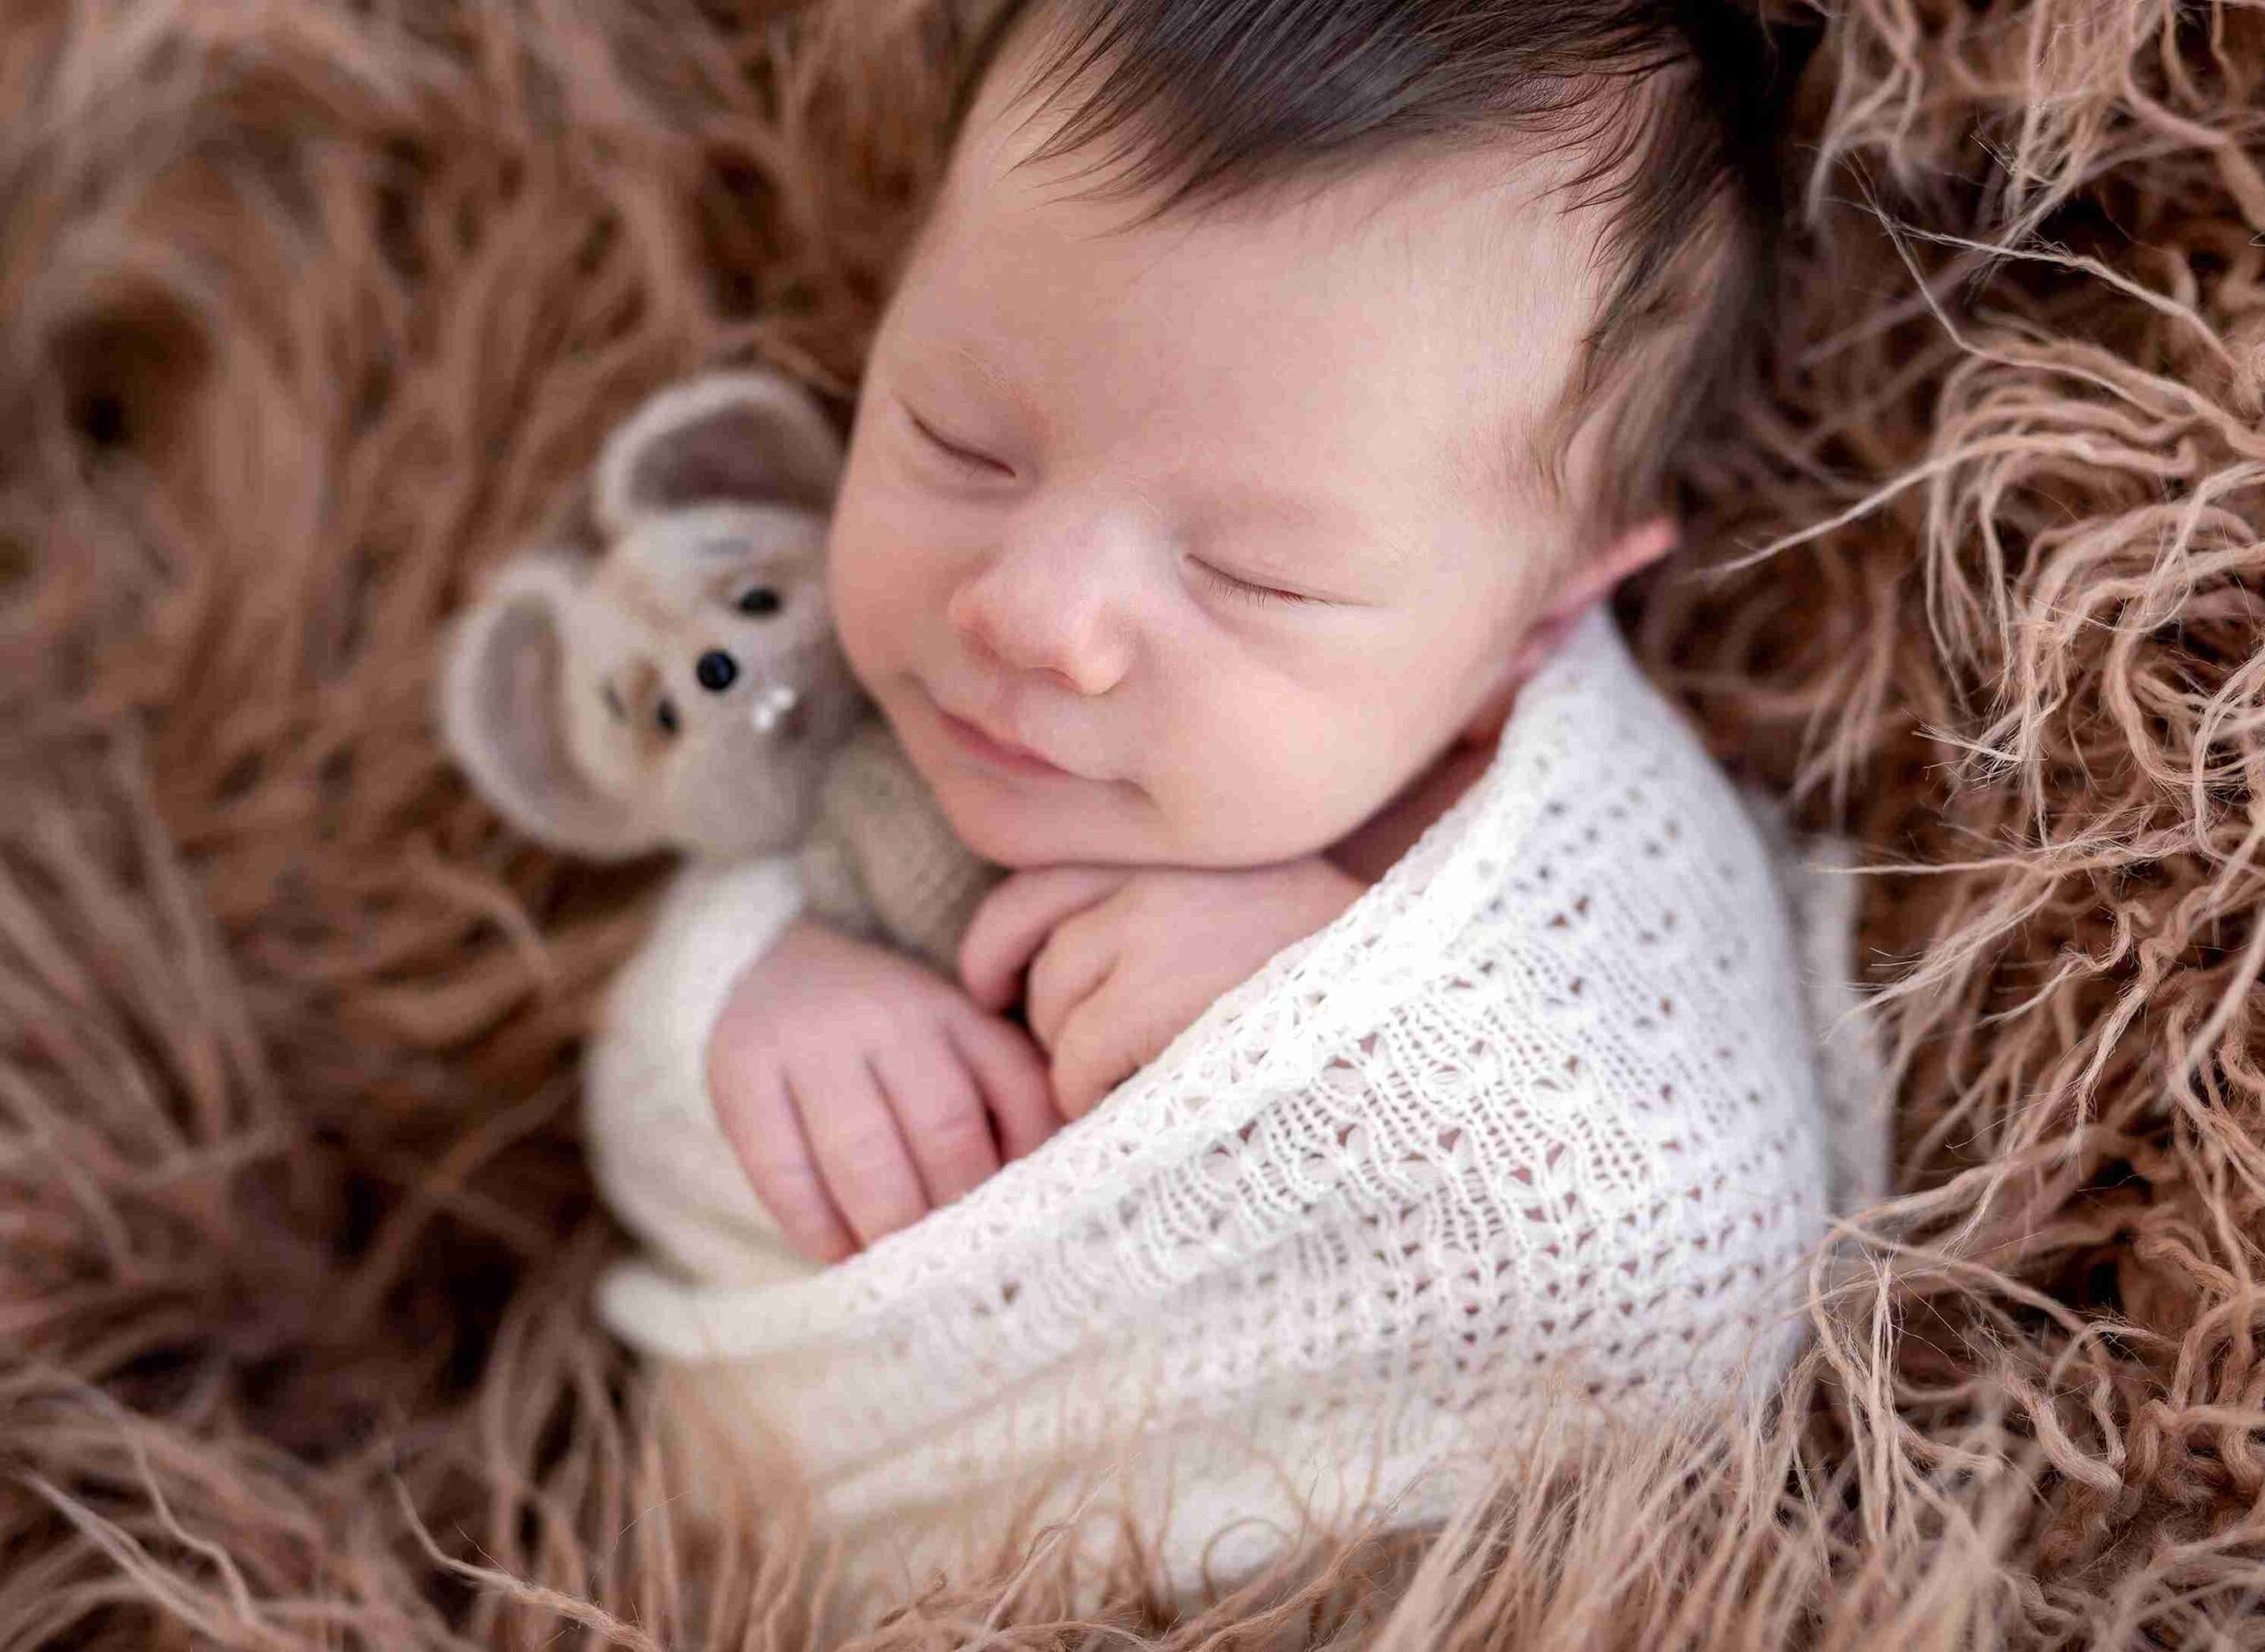 baby sound asleep embracing a stuffed toy